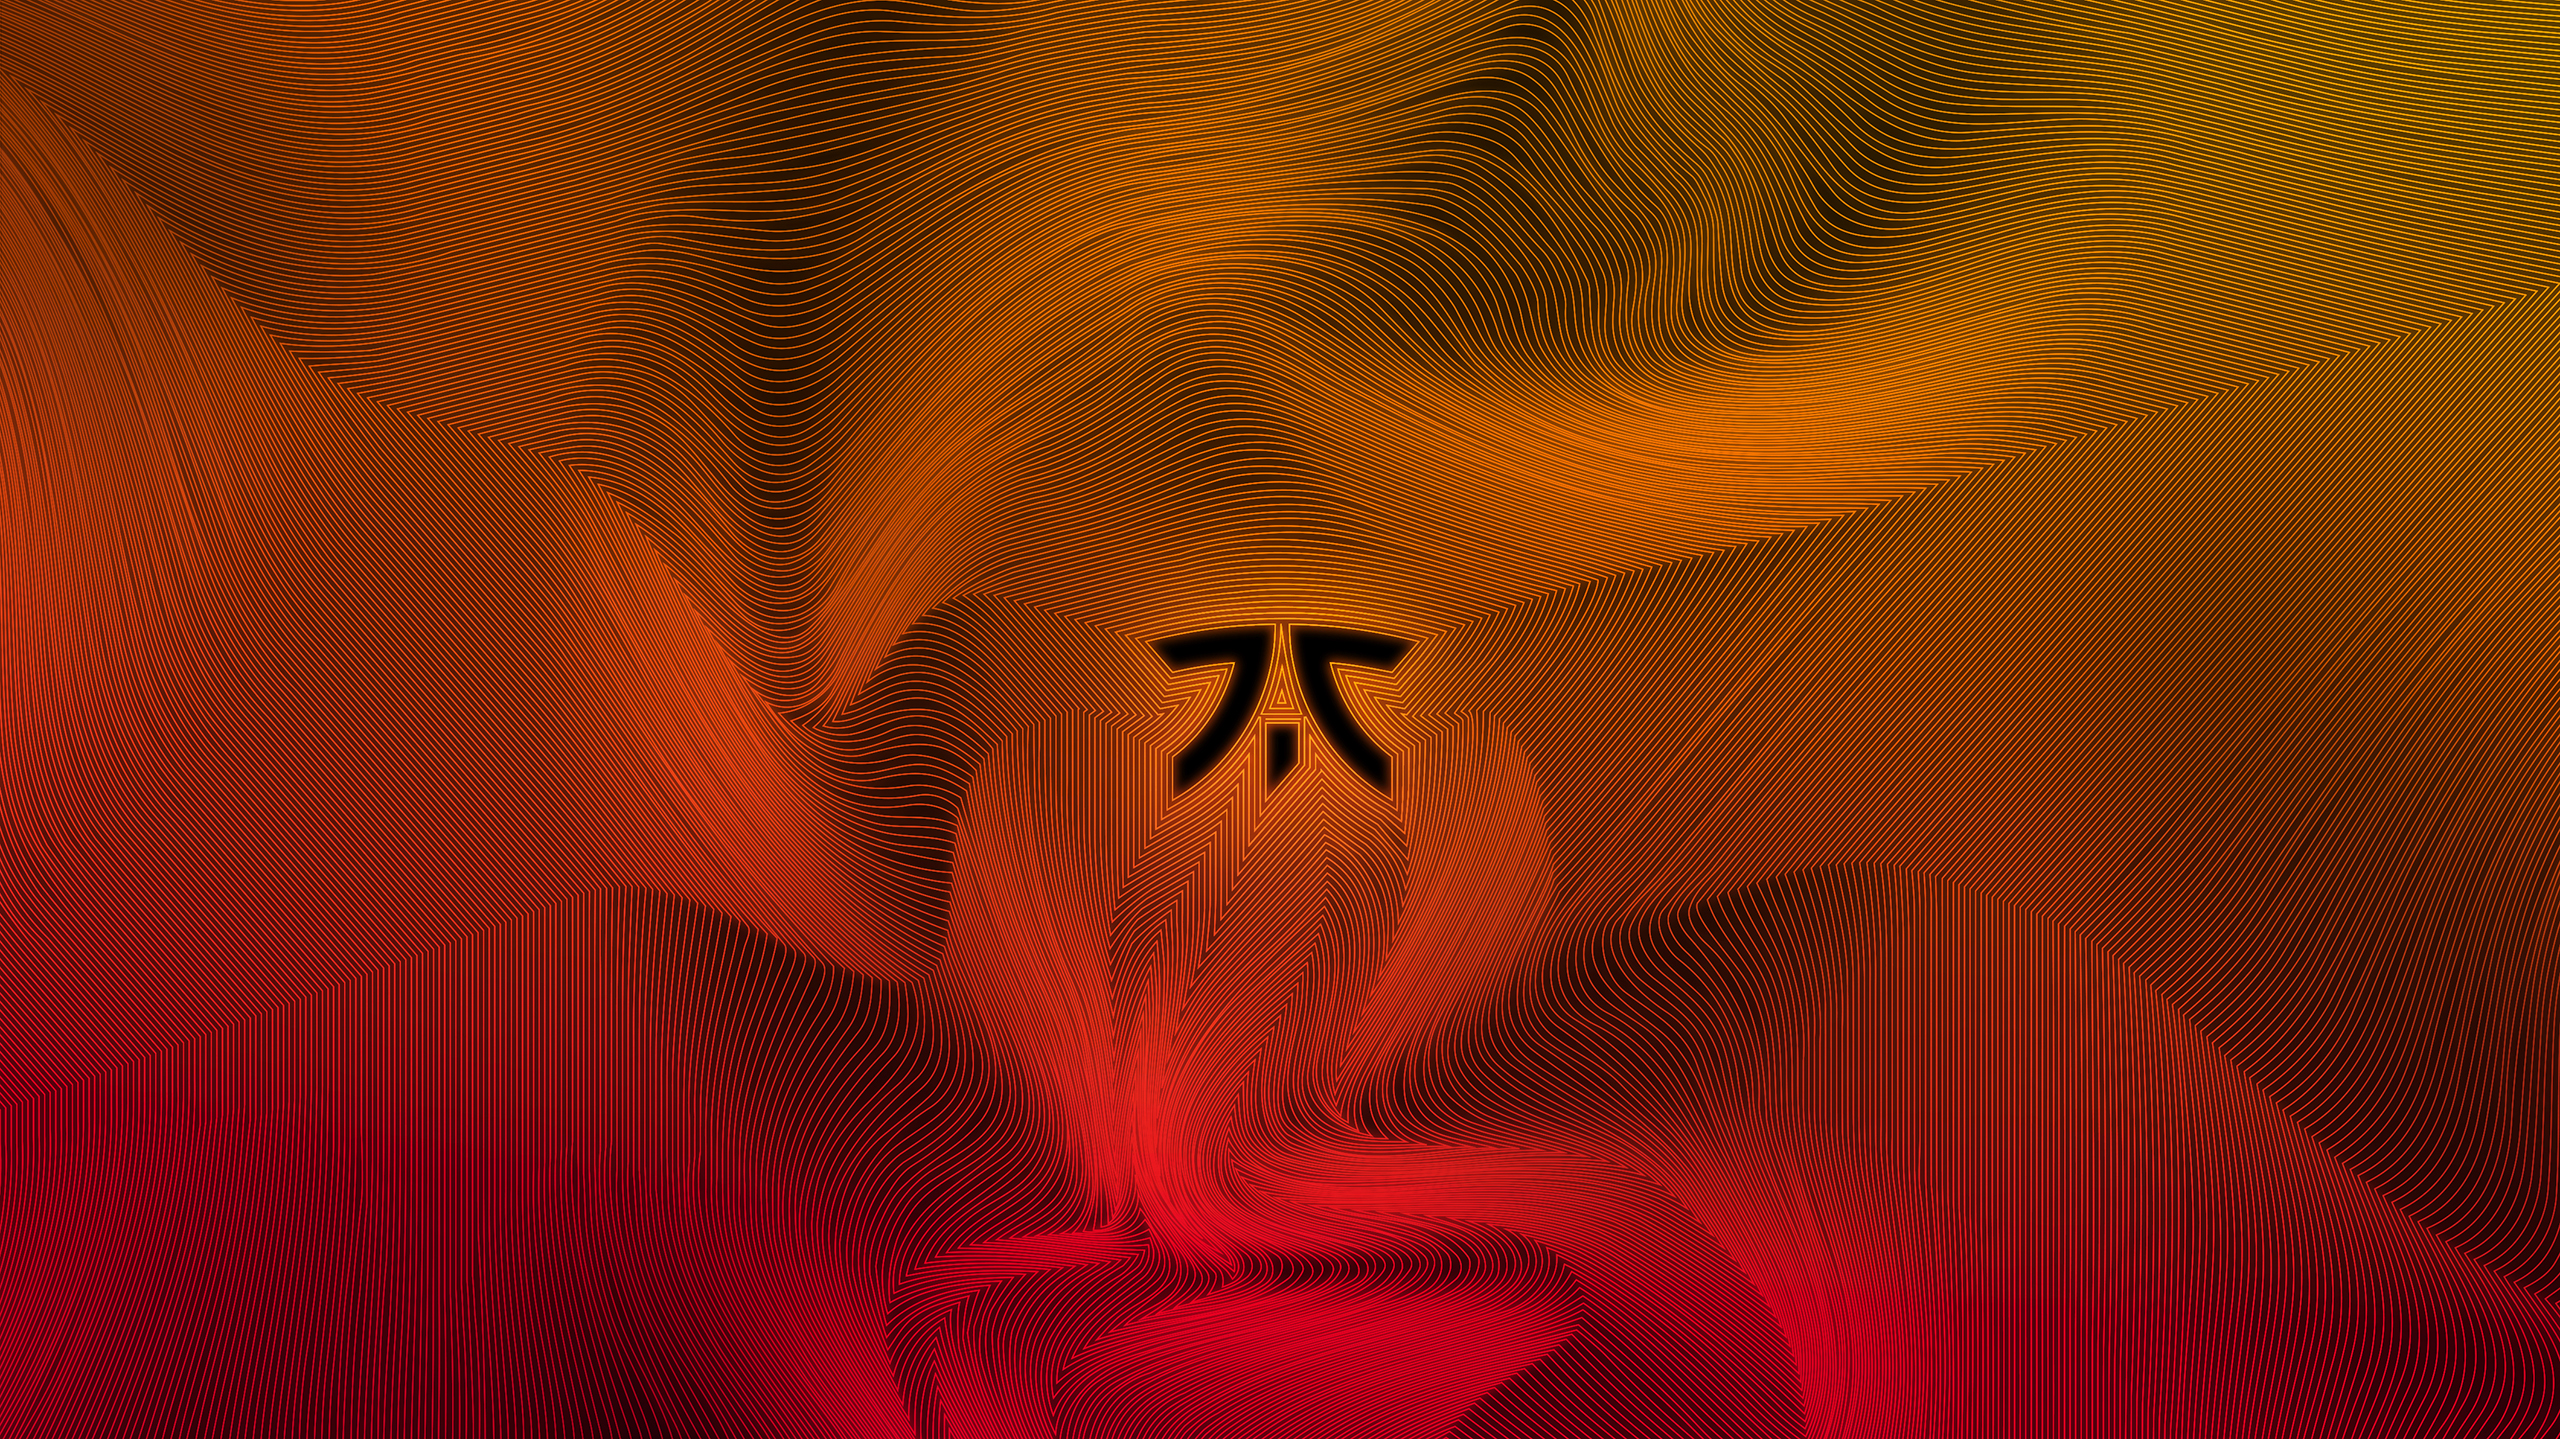 General 2560x1439 Fnatic abstract minimalism